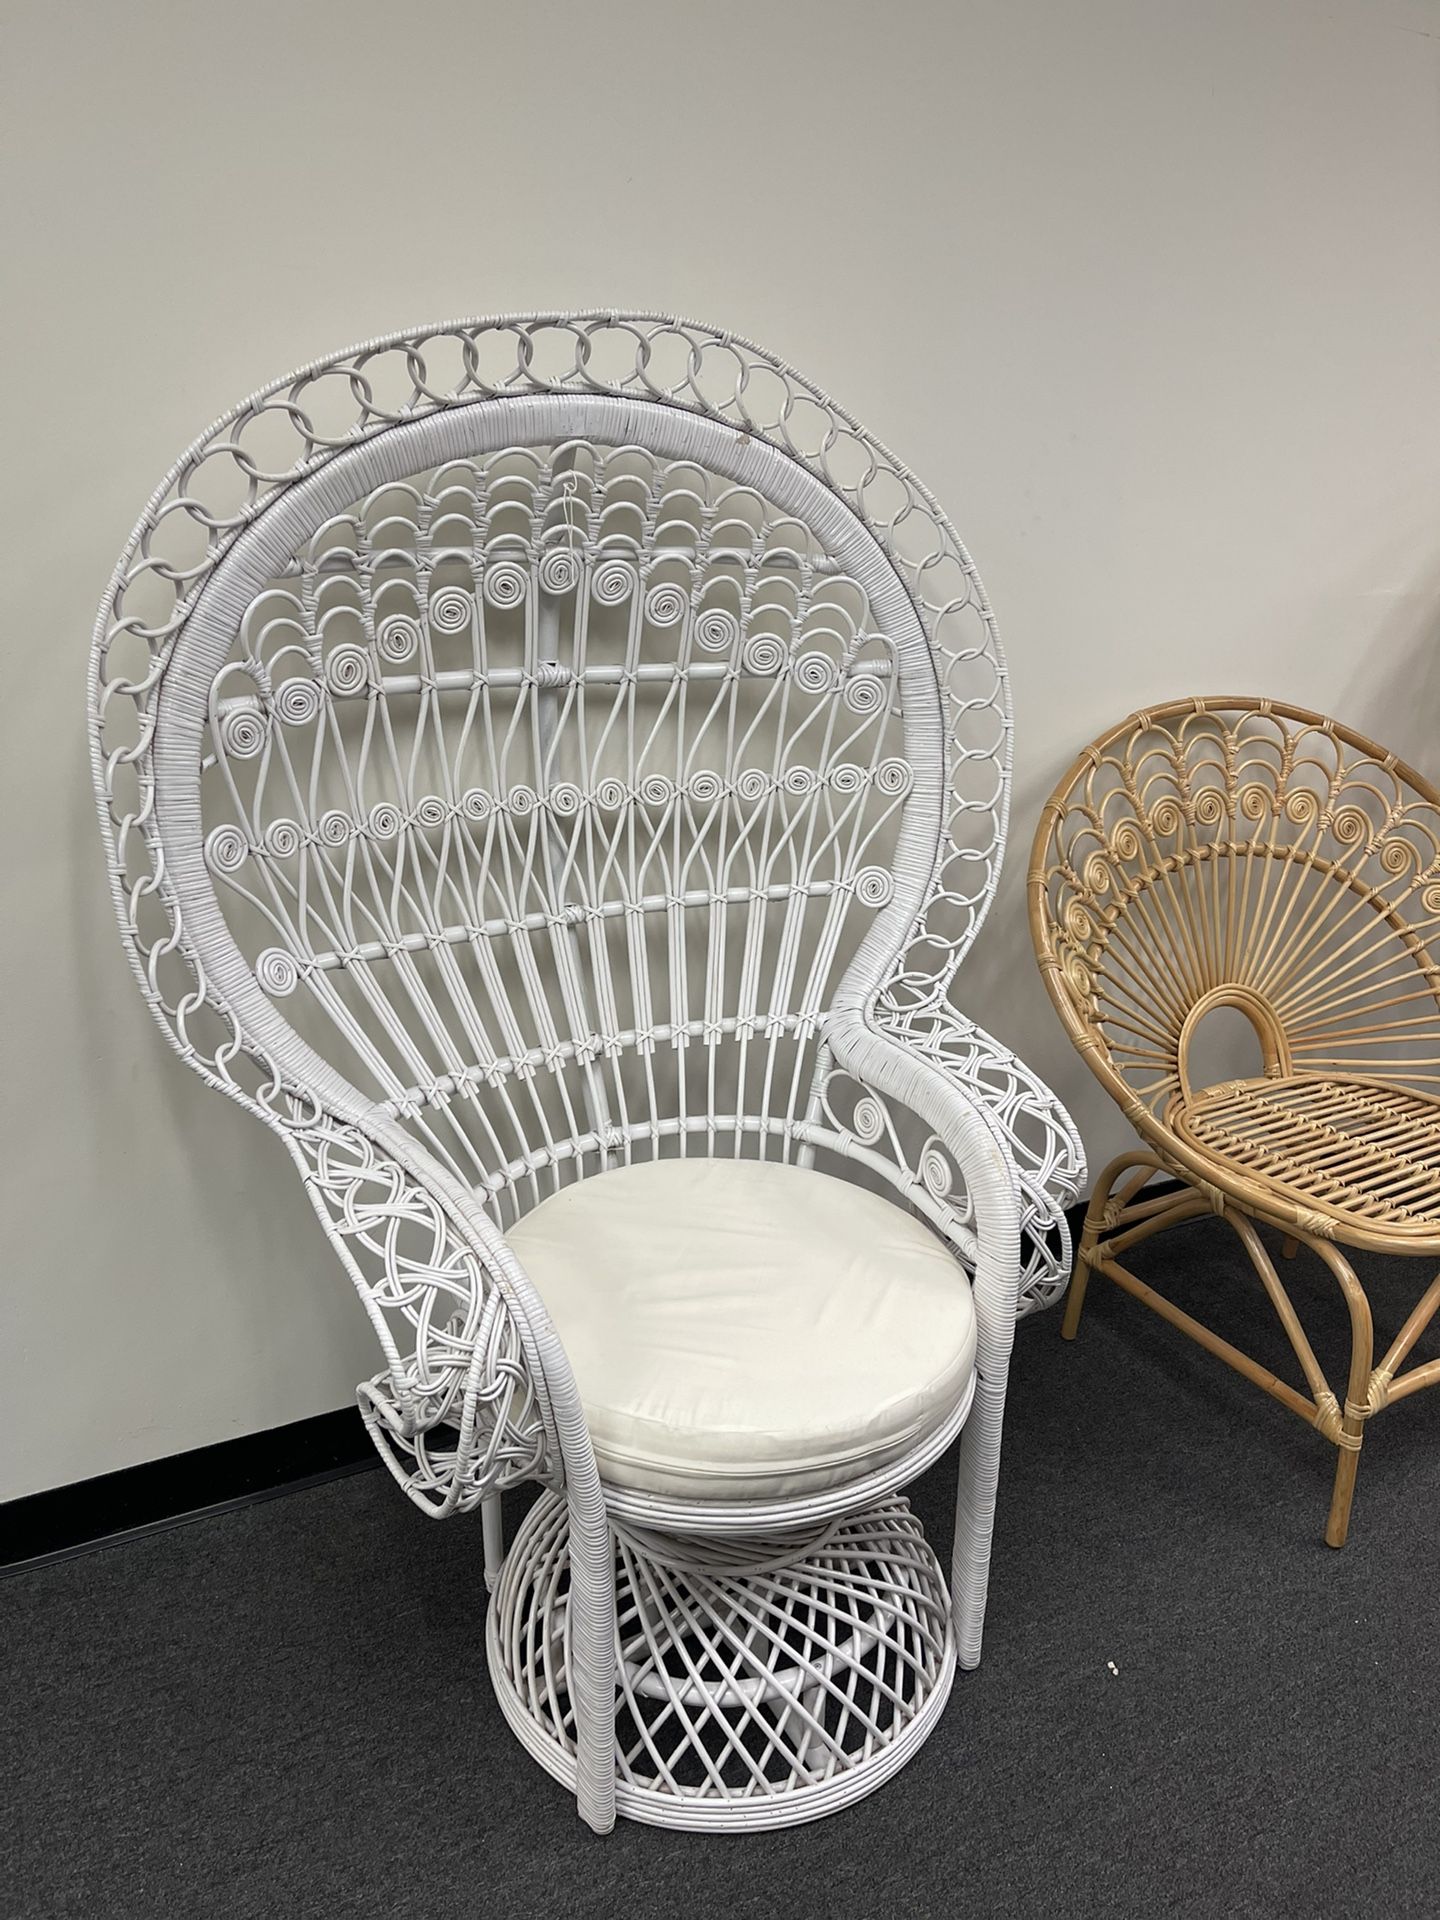 In Stock Now - White Peacock Rattan Chair Handmade Event Chair Backdrops